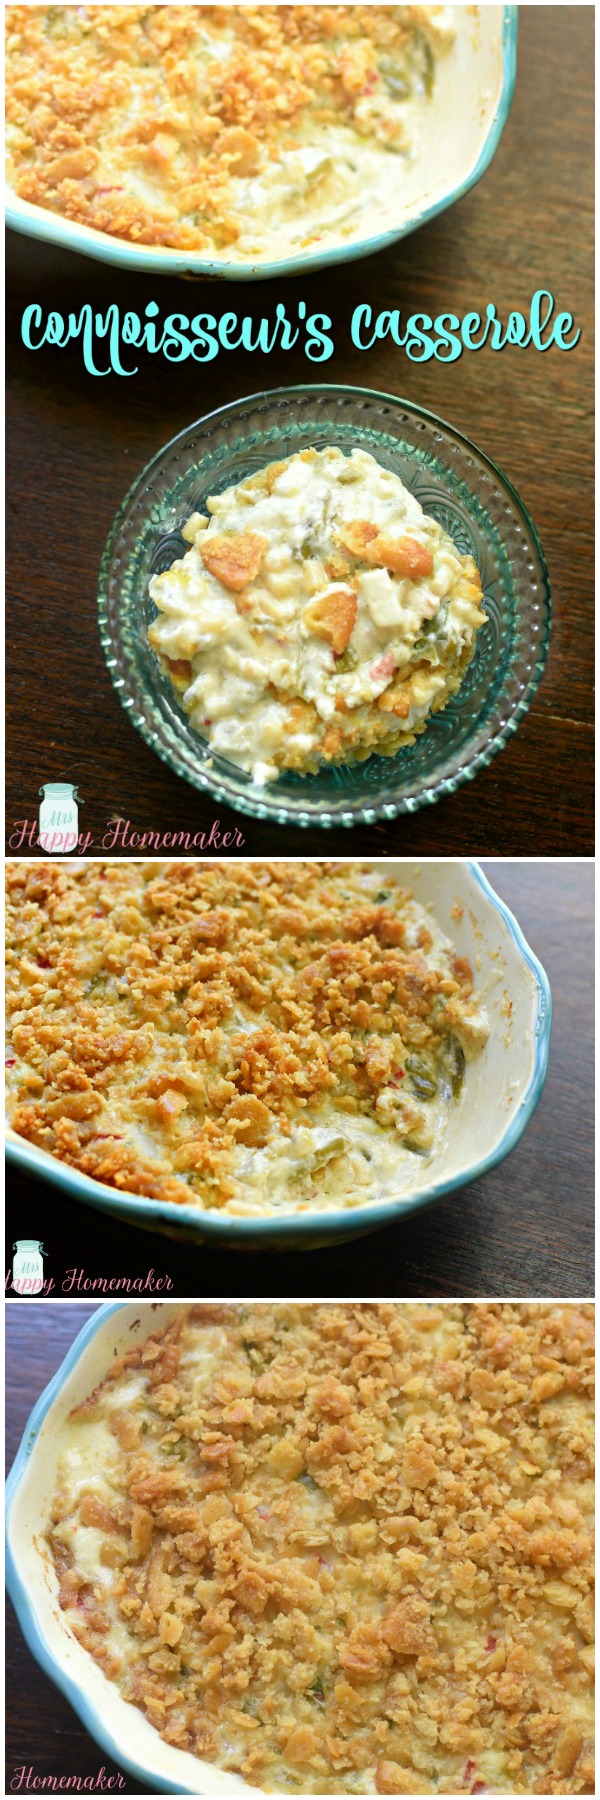 This Connoisseur's Casserole recipe was given to me by my grandmother many moons ago. It has been one of my favorite side dishes since I was a kid! | MrsHappyHomemaker.com @MrsHappyHomemaker #connoisseurscasserole #sidedish #southernrecipe #casserole 